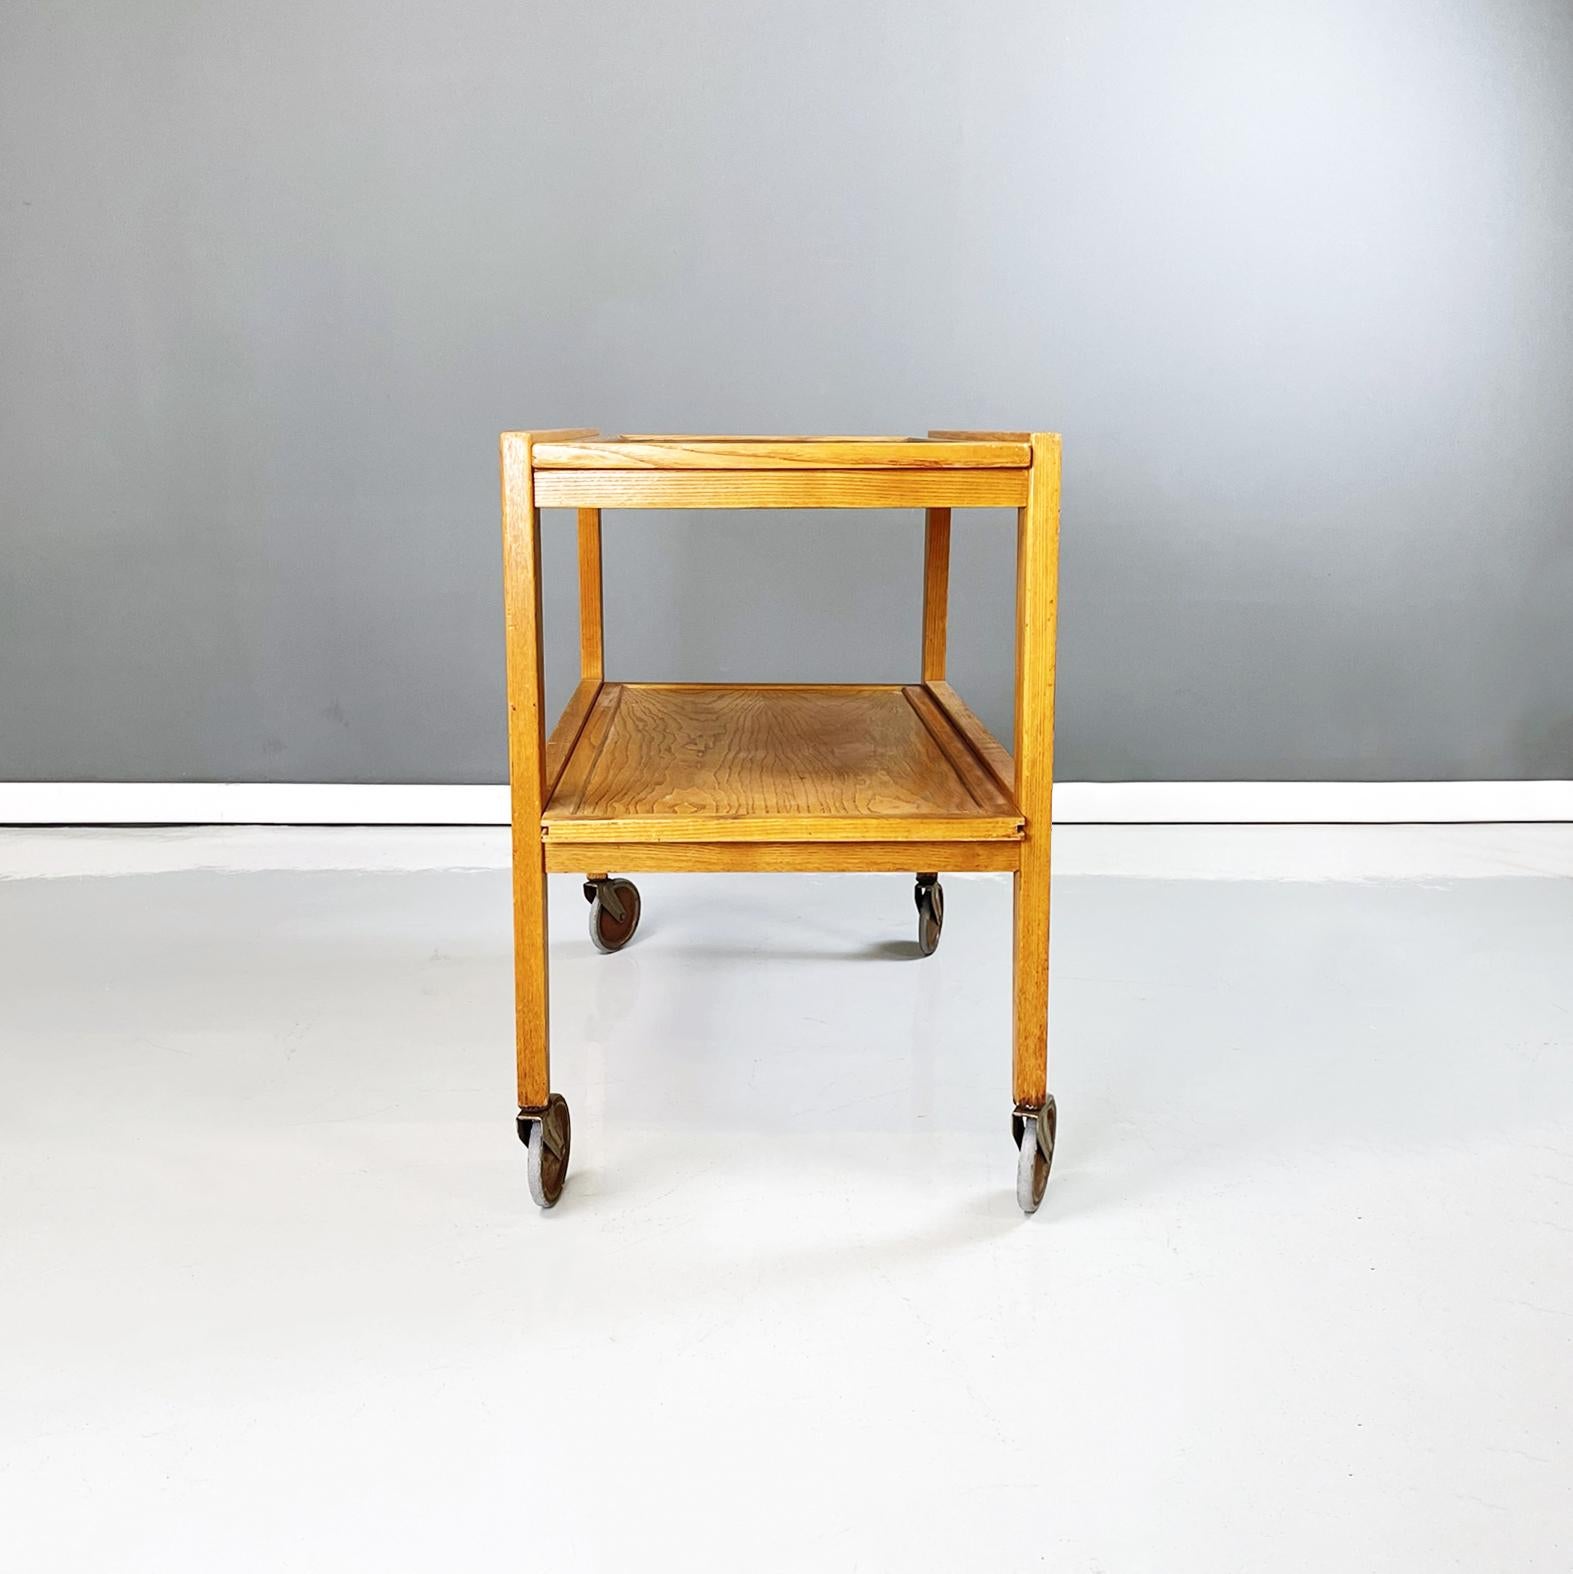 Mid-20th Century Italian Mid-Century Modern Wooden Cart with Two Shelfs, 1960s For Sale